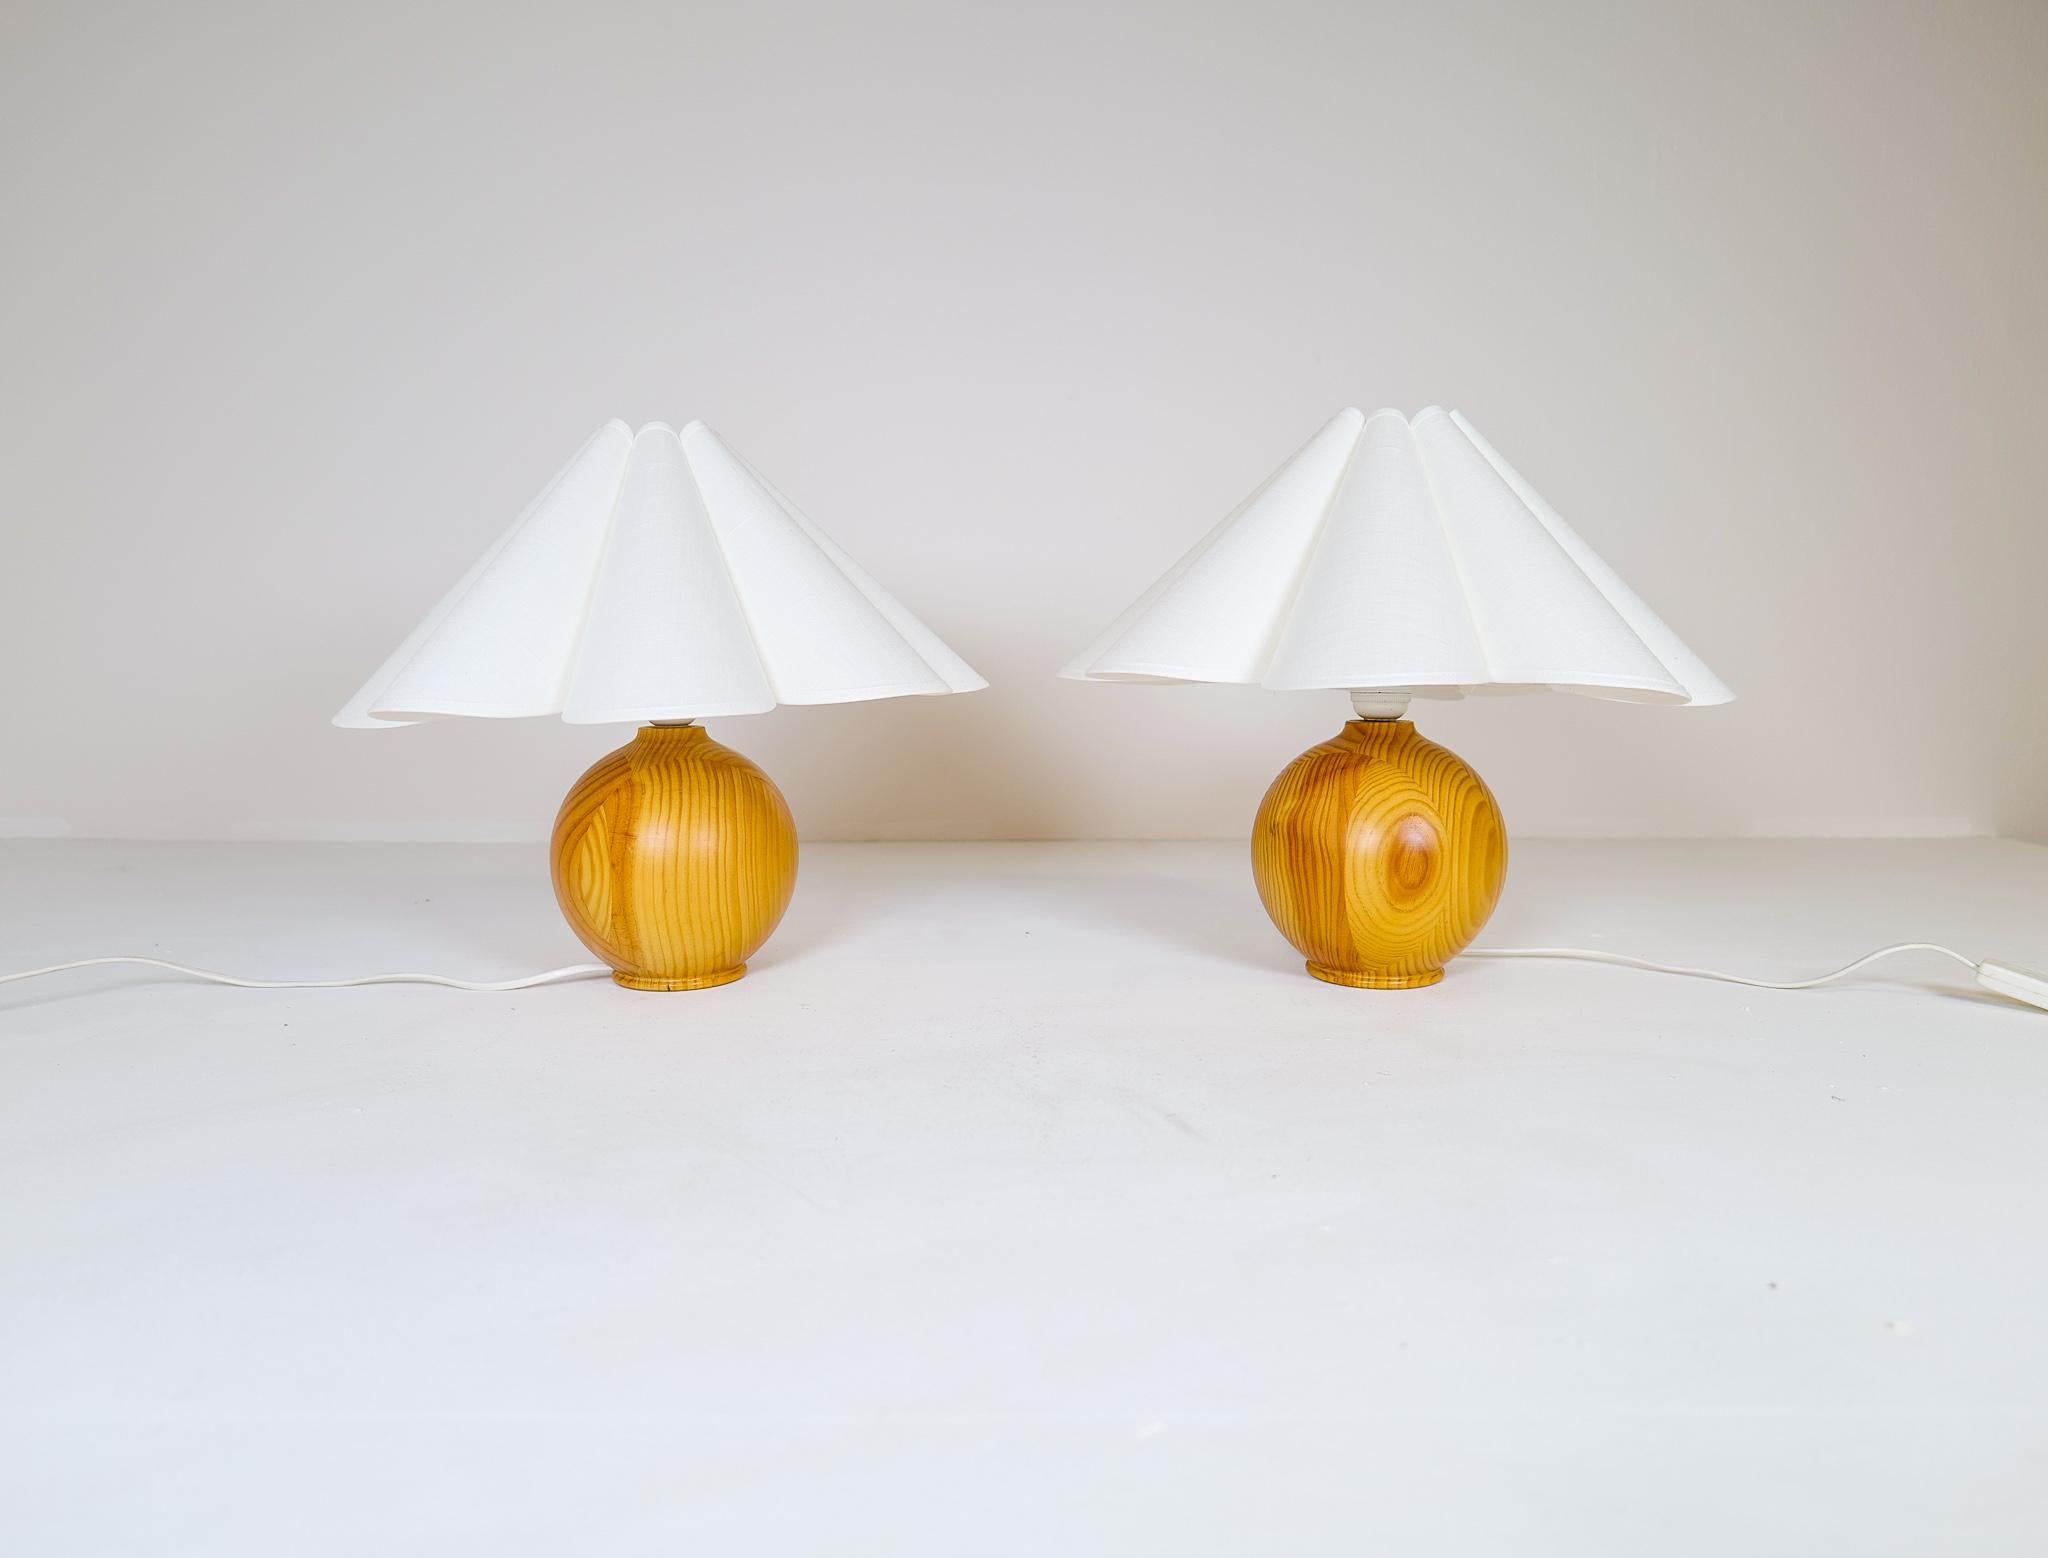 Swedish Mid-Century Modern Sculptural Table Lamps in Solid Pine, Sweden, 1970s For Sale